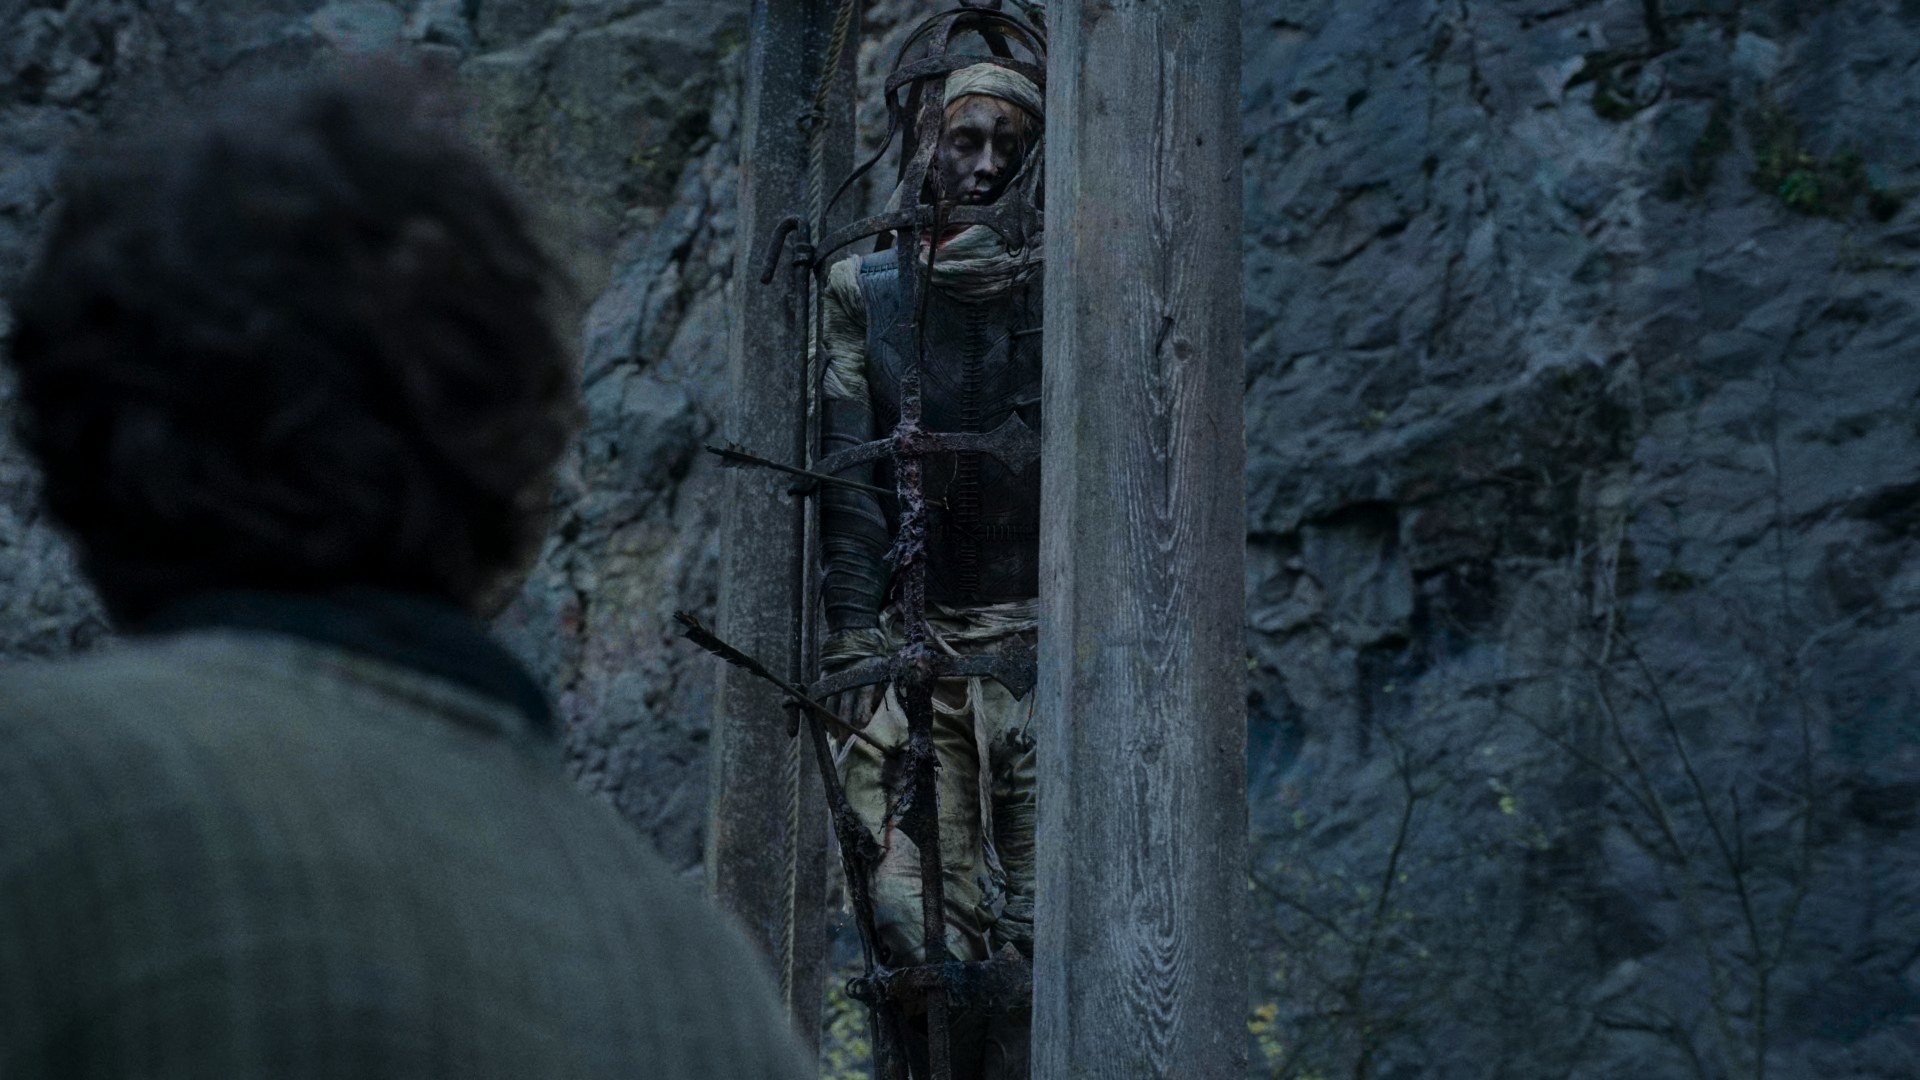 A man in beige clothing and a headscarf is in a cage hanging from a gibbet. He is pierced with many arrows through his torso, which has a stylised leather jerkin on it. He has been dead for a while.